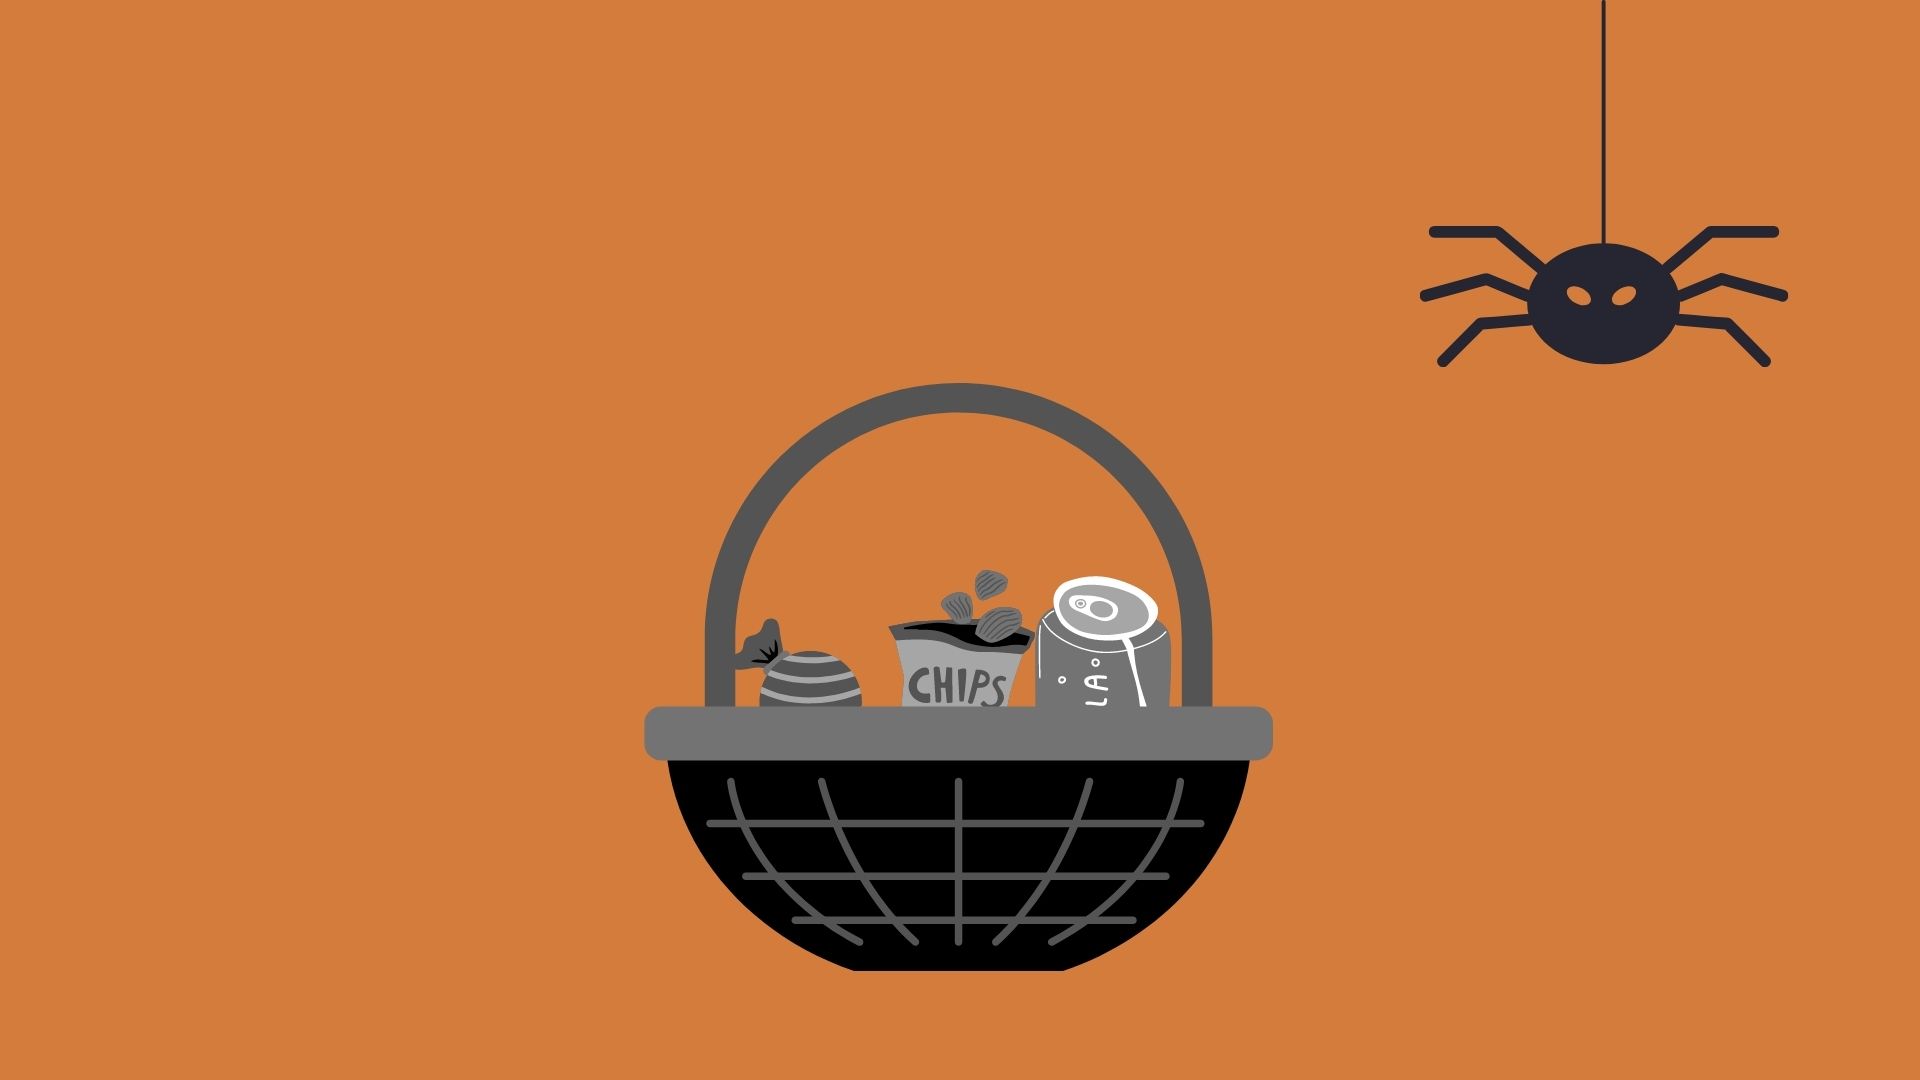 An orange background with a black and white basket filled with goodies and a black spider hanging from the top of the image